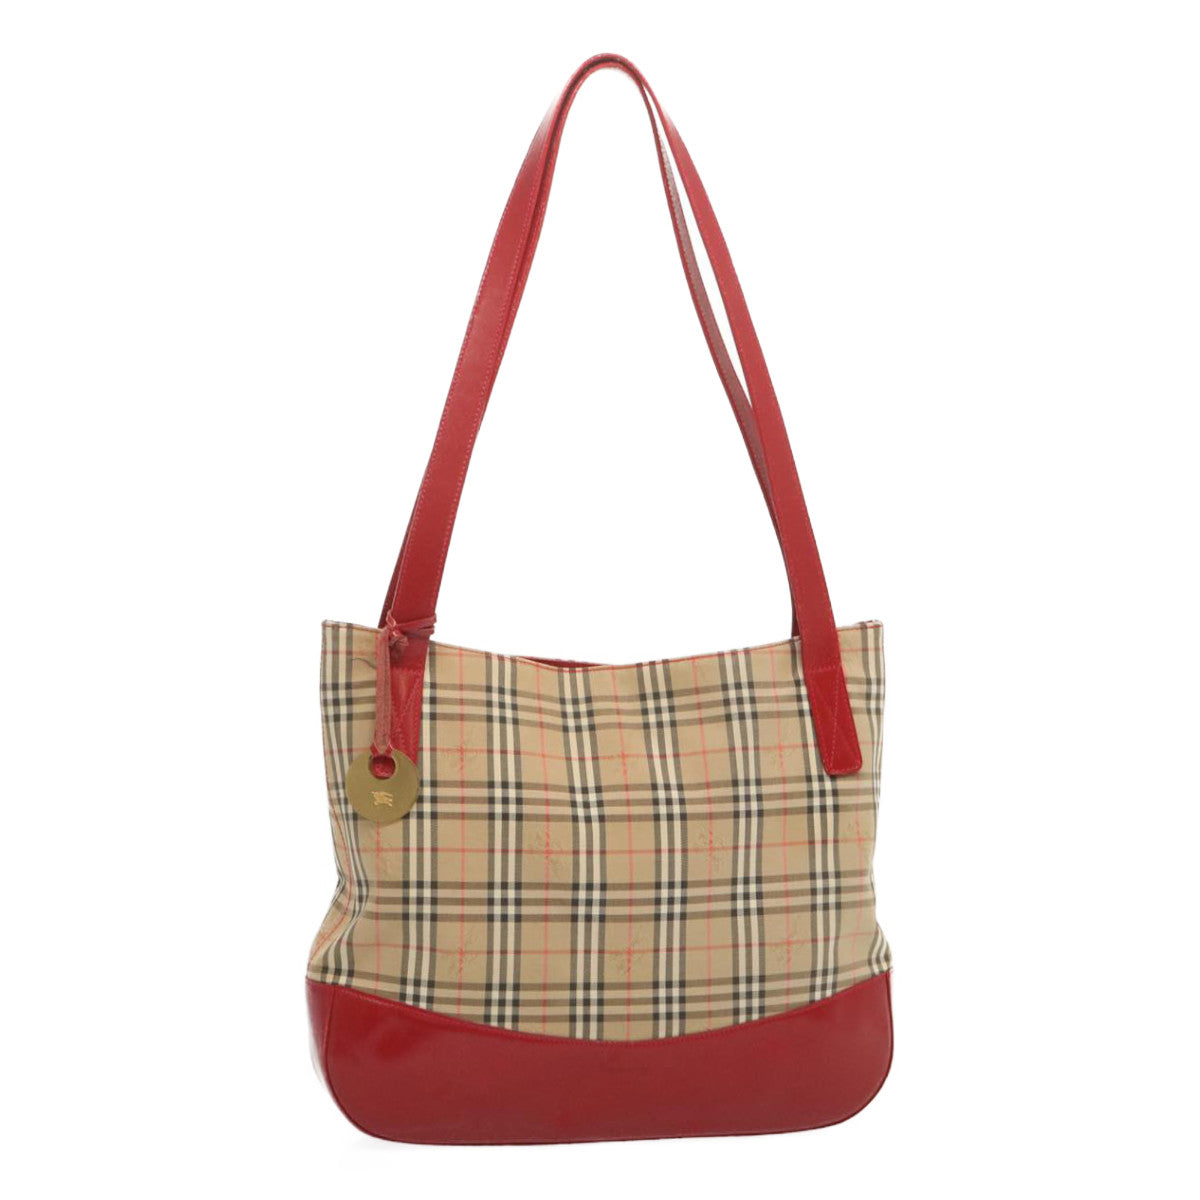 Burberrys Nova Check Tote Bag Canvas Beige Red Auth 67775